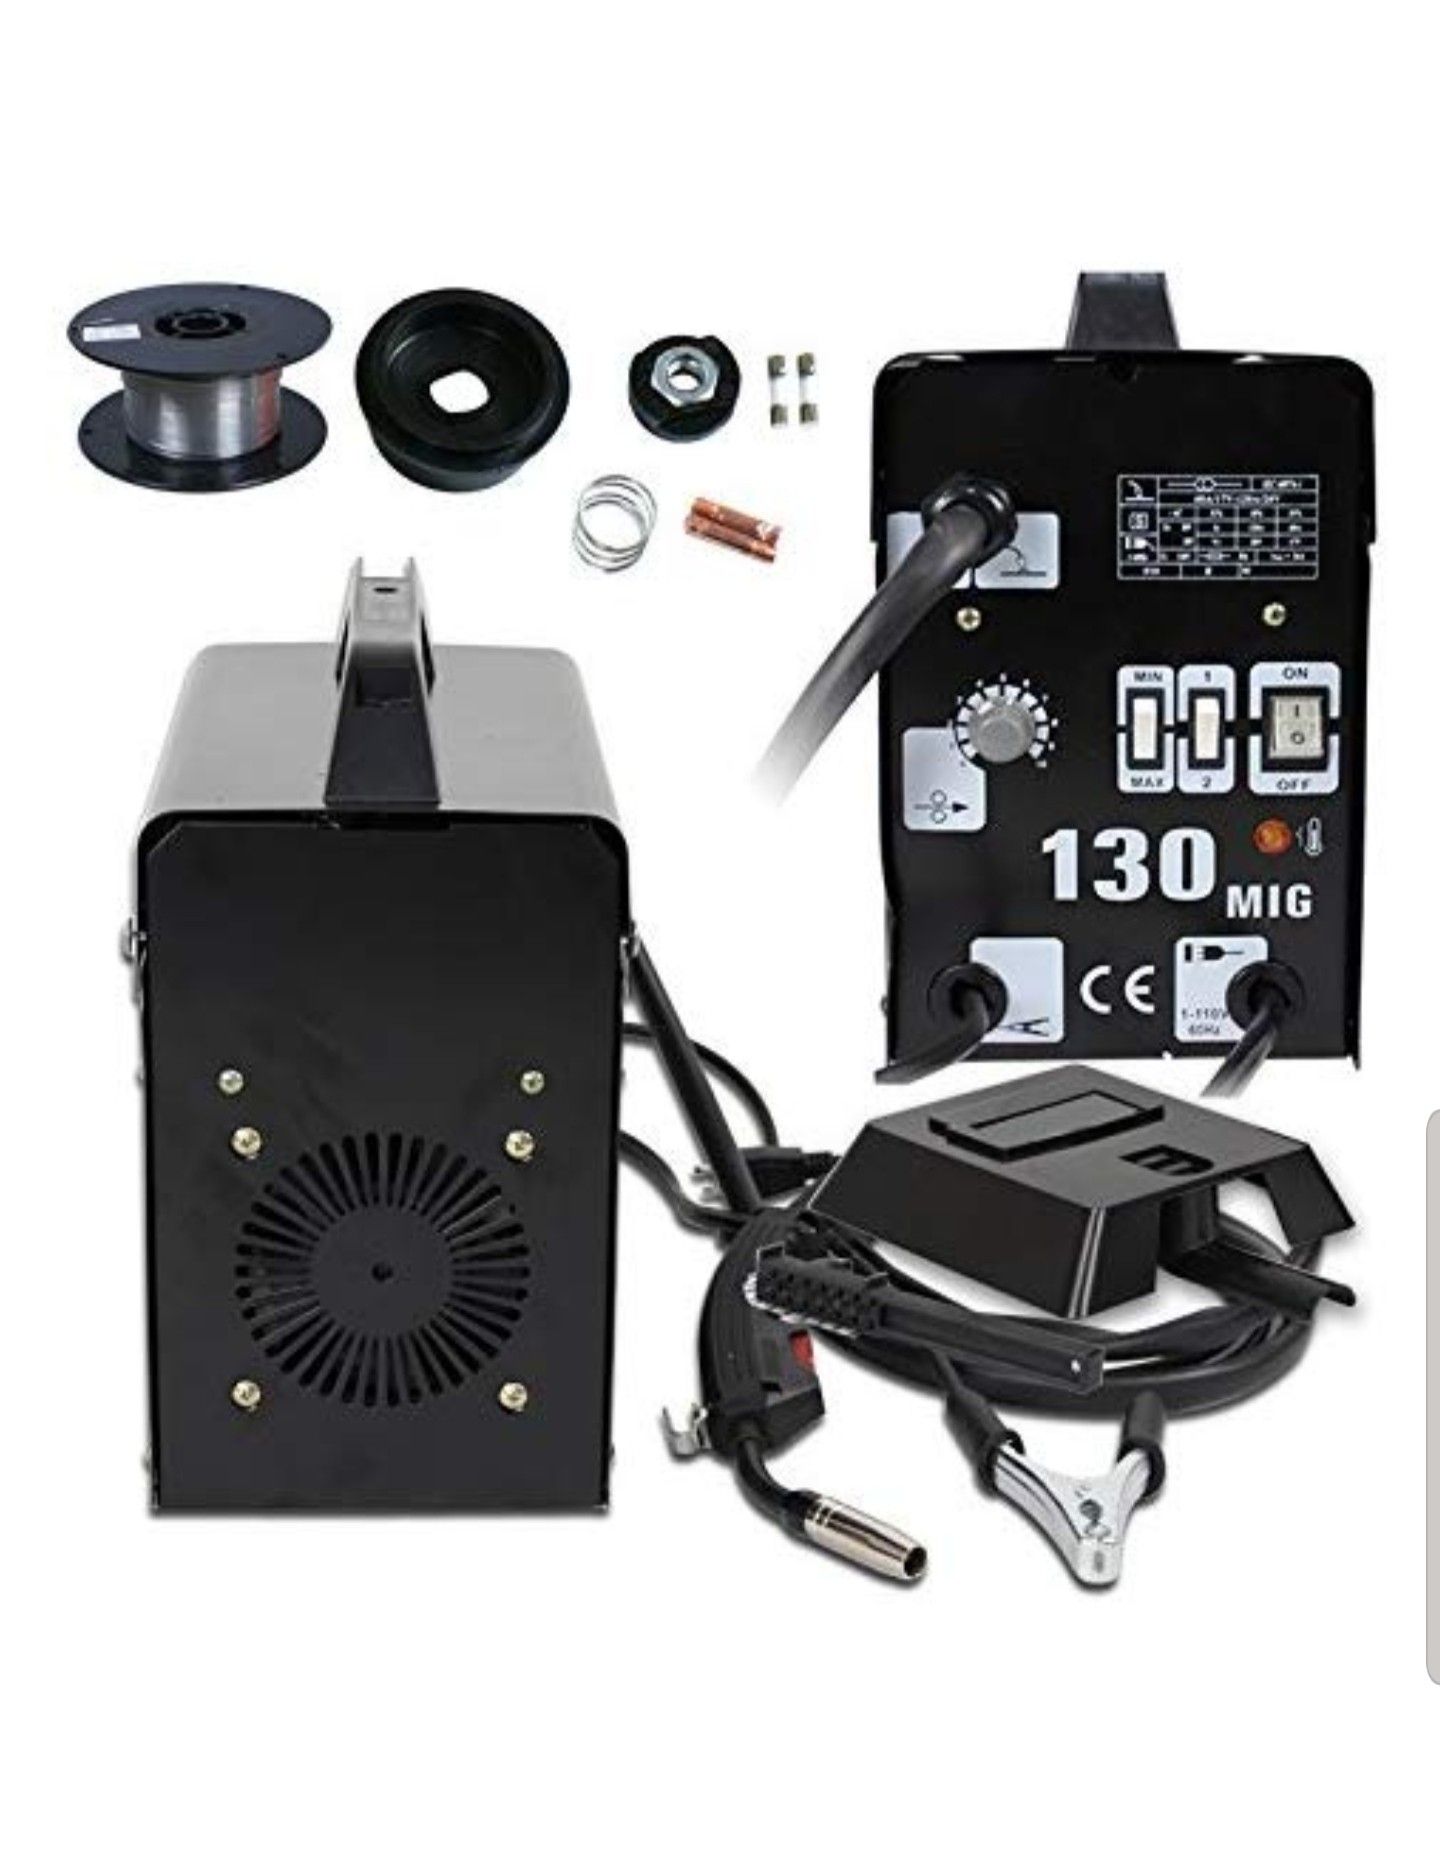 Super Deal PRO Commercial MIG 130 AC Flux Core Wire Automatic Feed Welder Welding Machine 110V